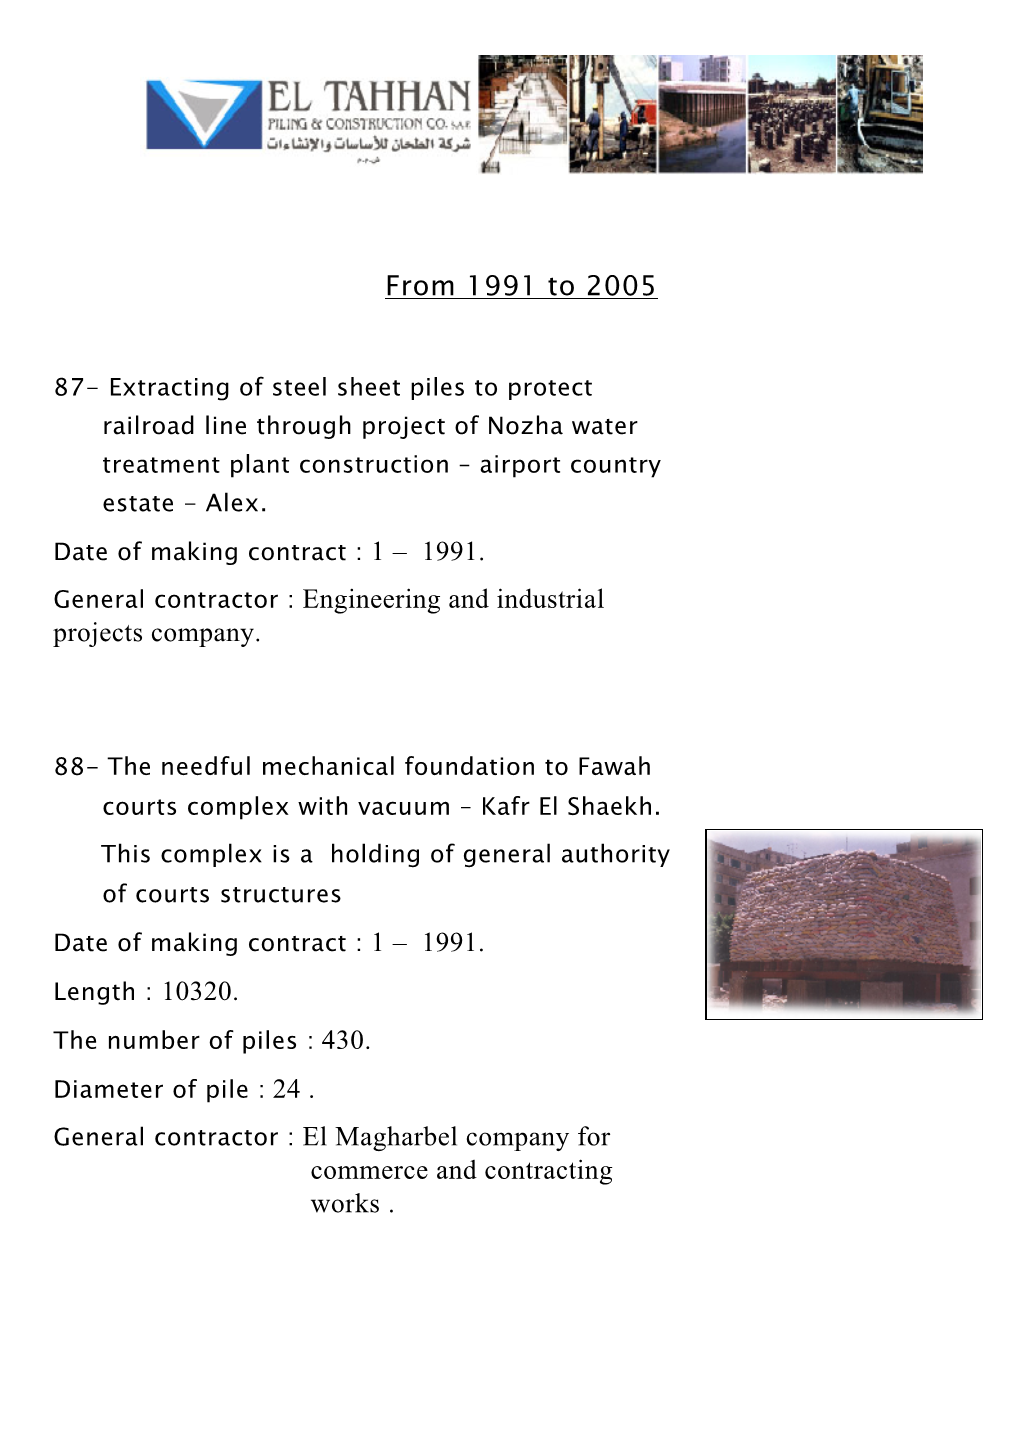 From 1991 to 2005 General Contractor : Engineering and Industrial